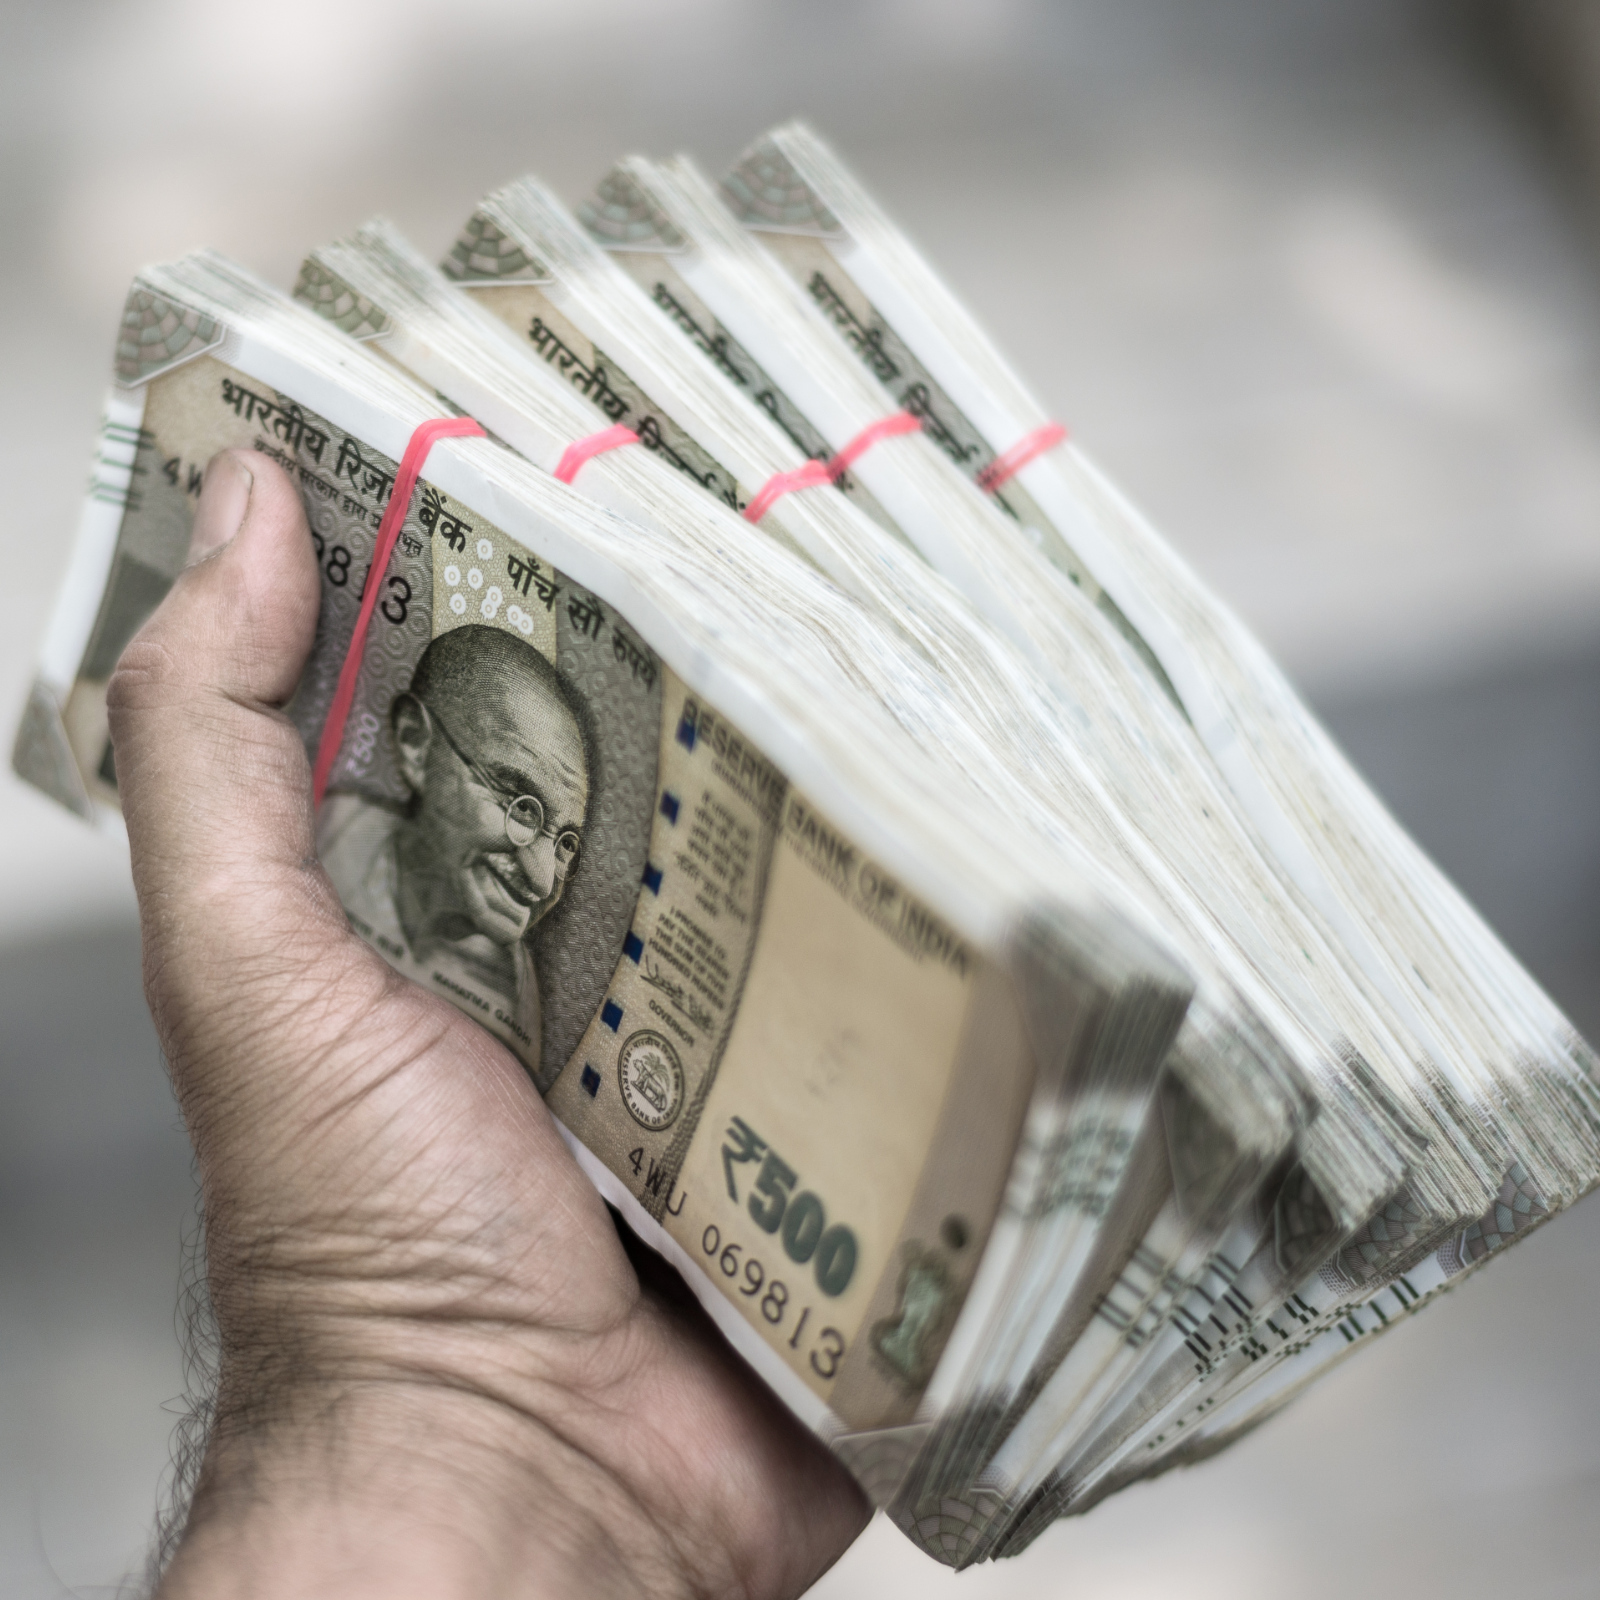 Indian Bitcoin Ponzi Schemer Offers to Repay Initial Investments to Victims